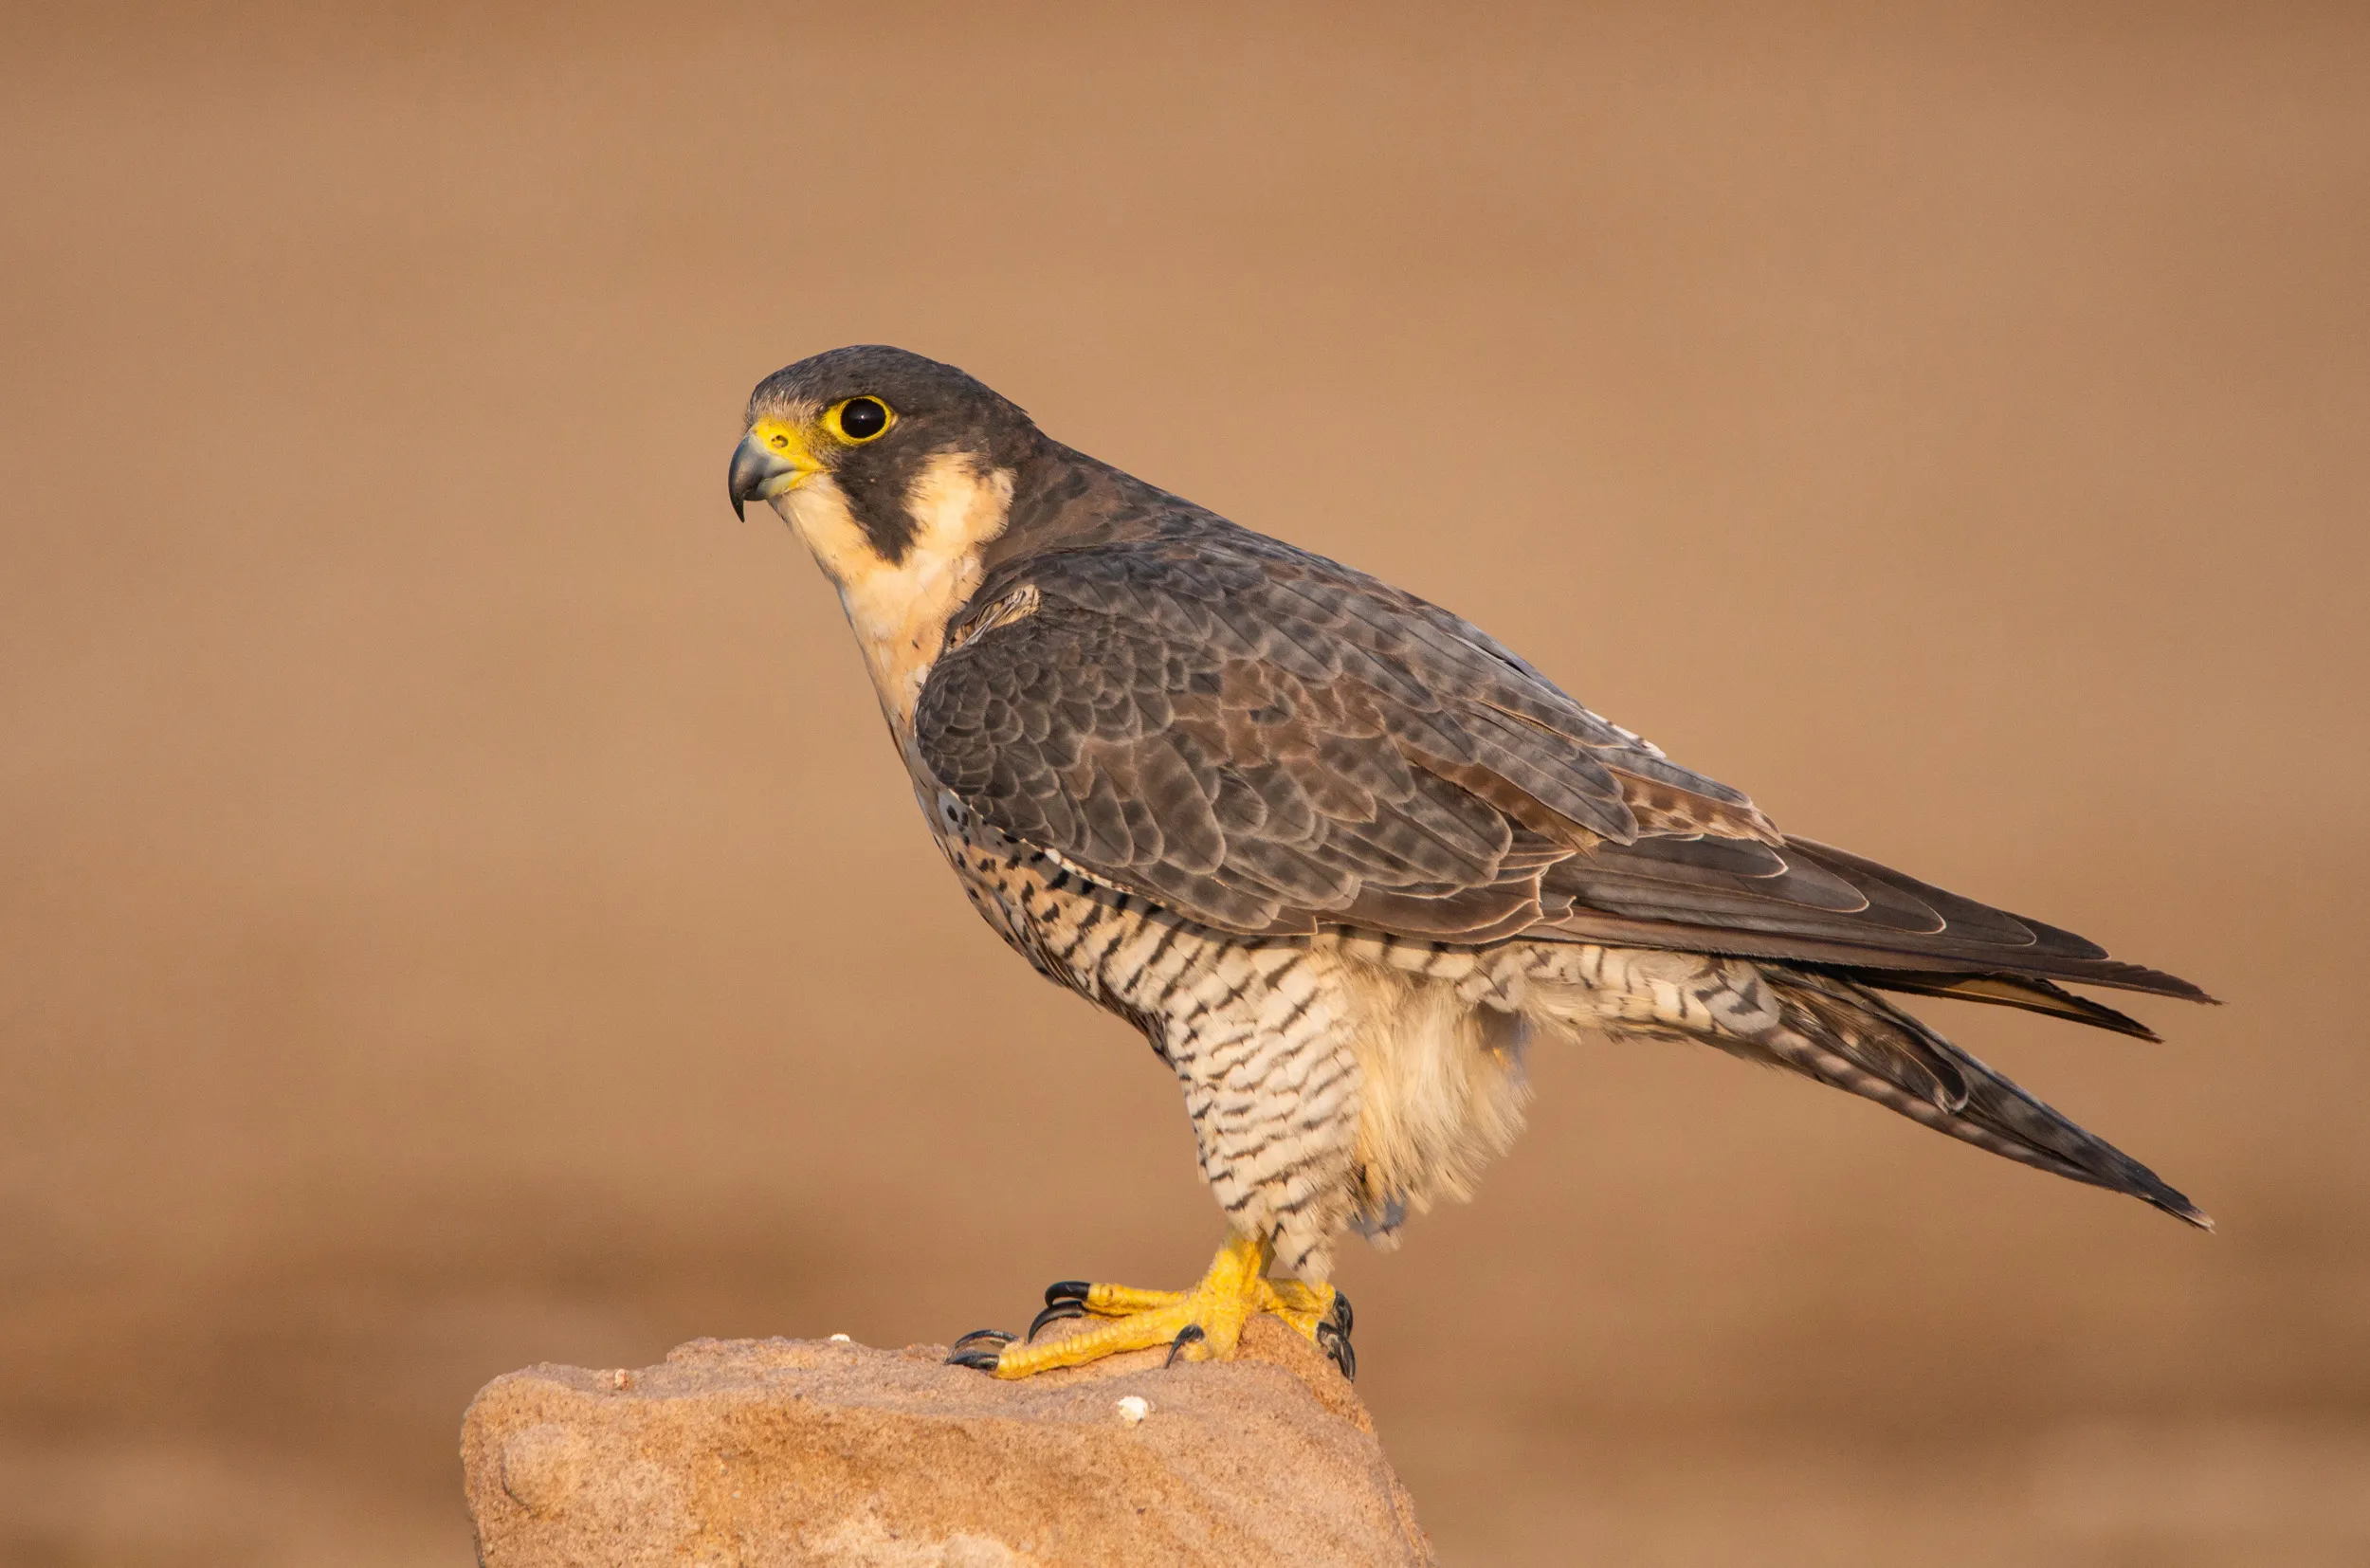 A lone Peregrine Falcon perched on a rock with a dusty orange background.